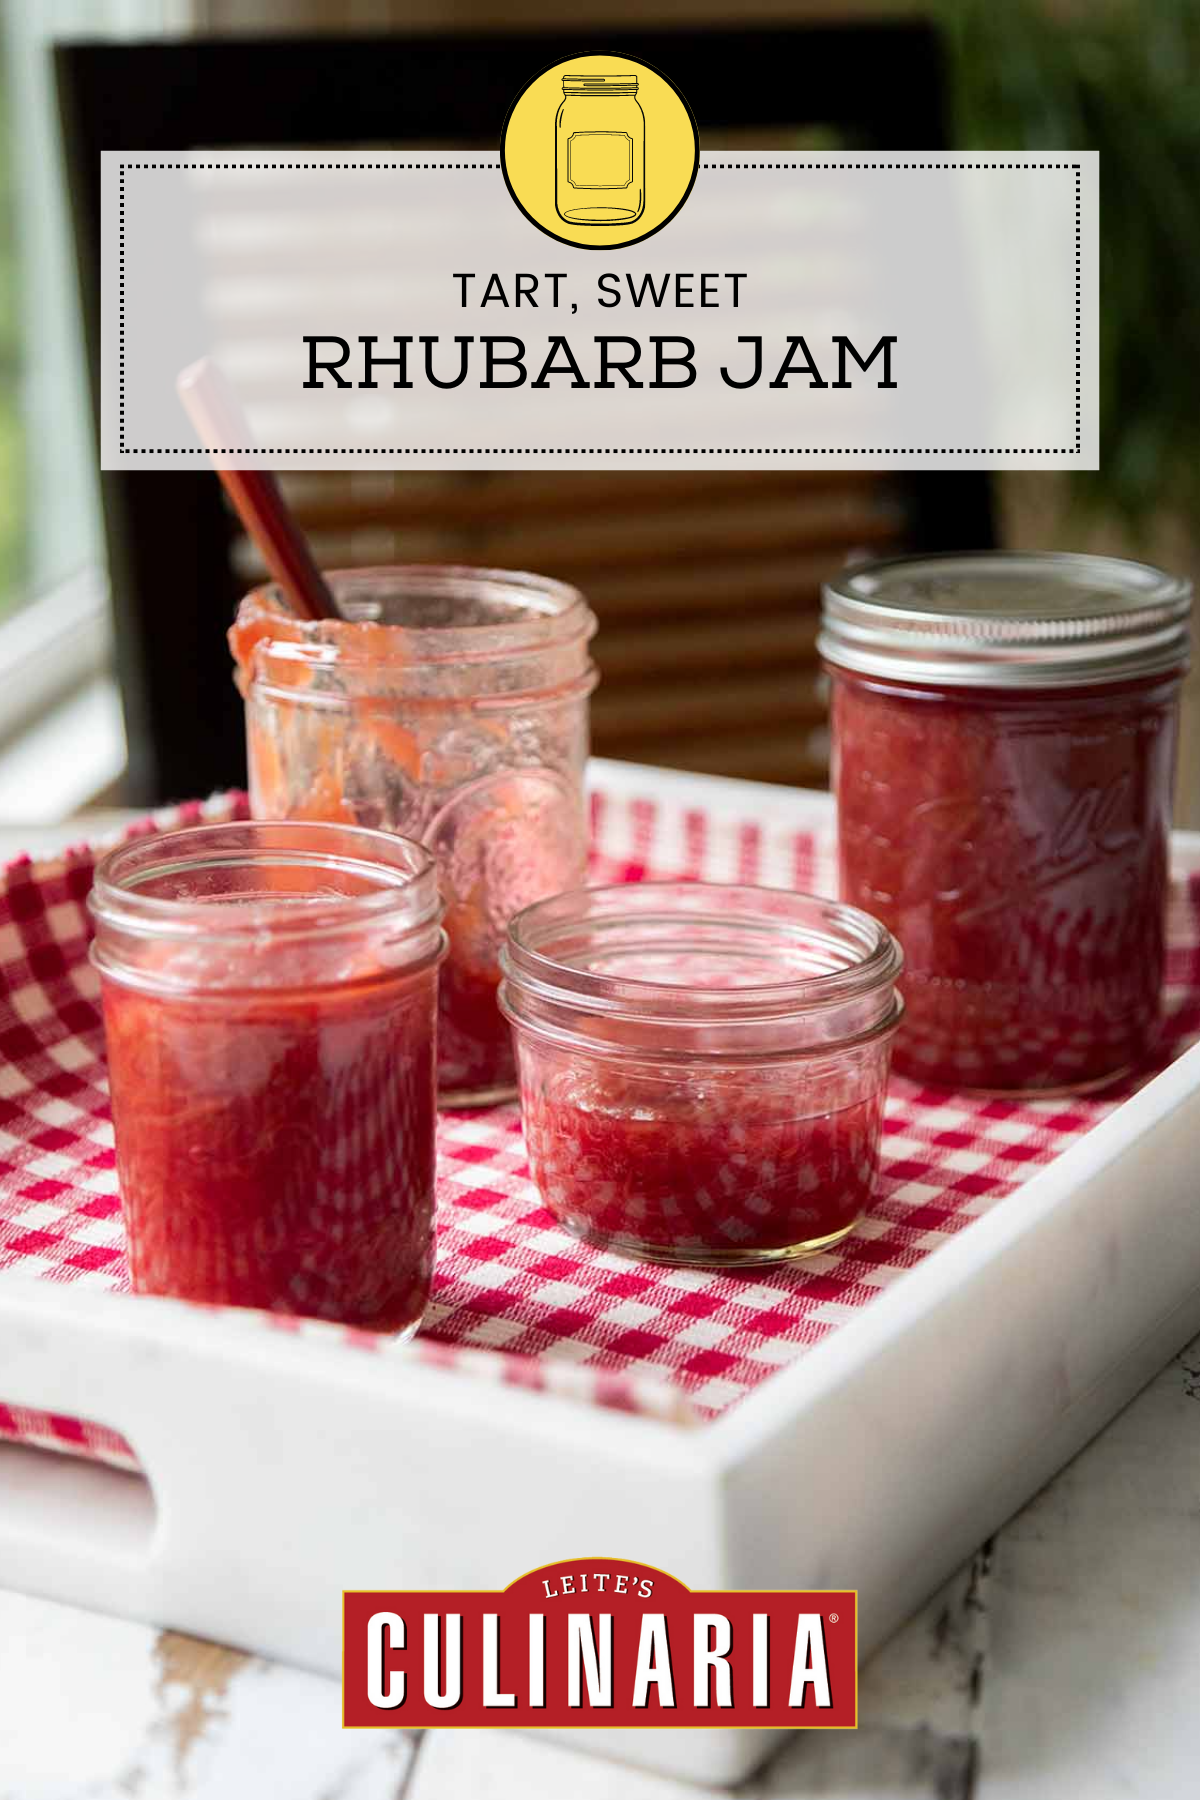 Four jars of rhubarb jam on a white tray lined with checkered cloth.